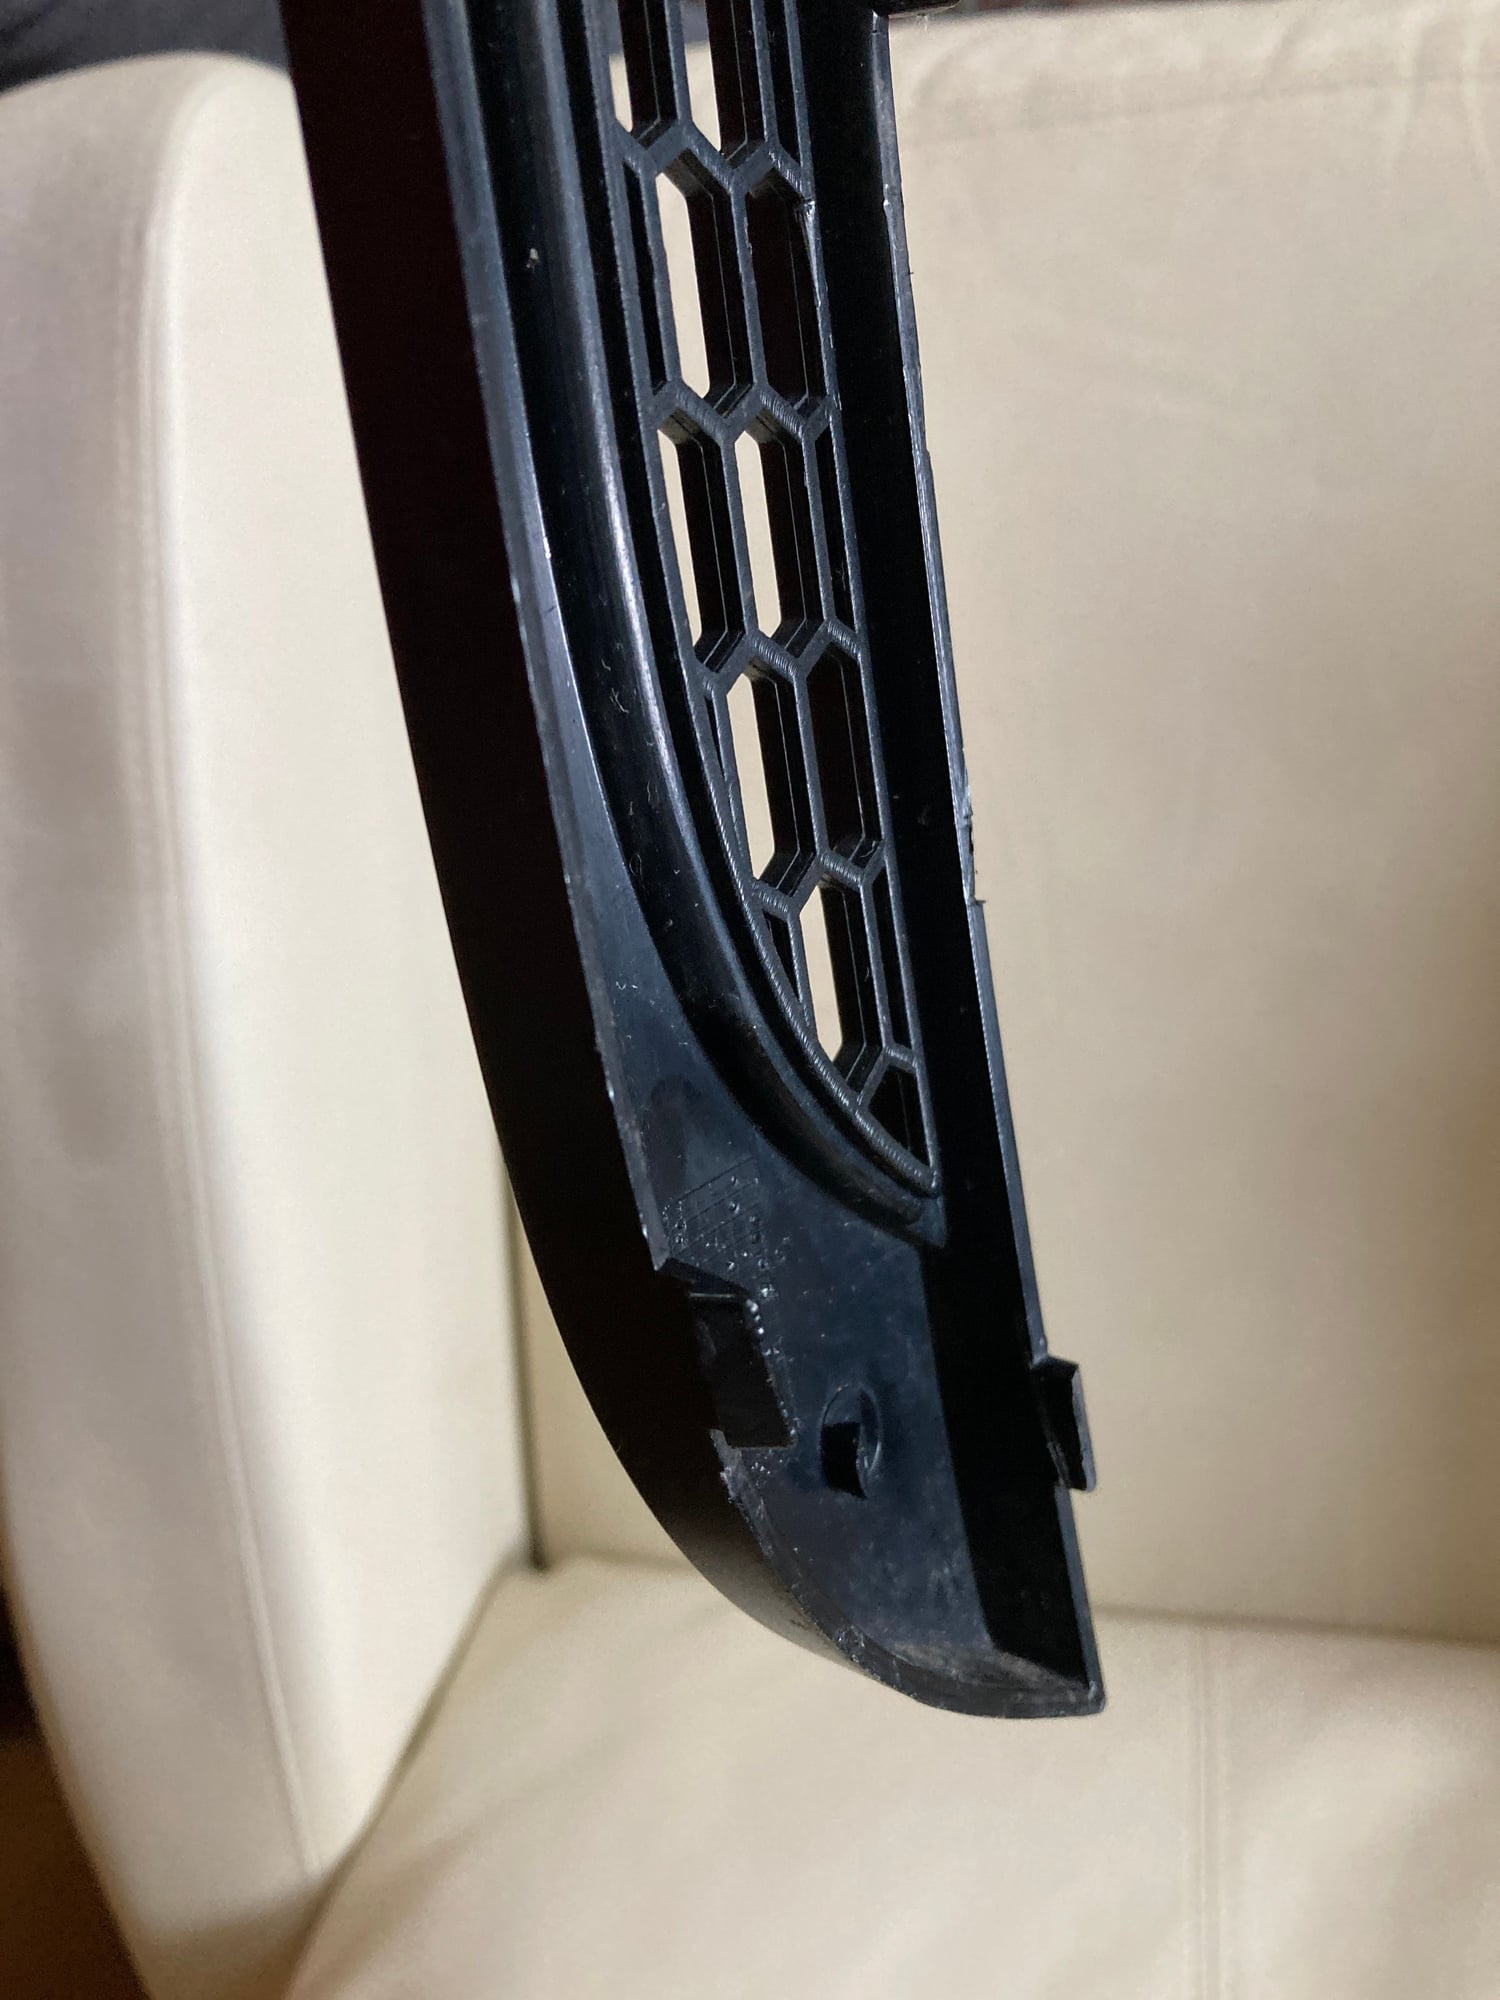 Exterior Body Parts - Aero upper bumper grill (OEM) (NLA) - Used - All Years  All Models - All Years  All Models - Brockton, MA 02302, United States